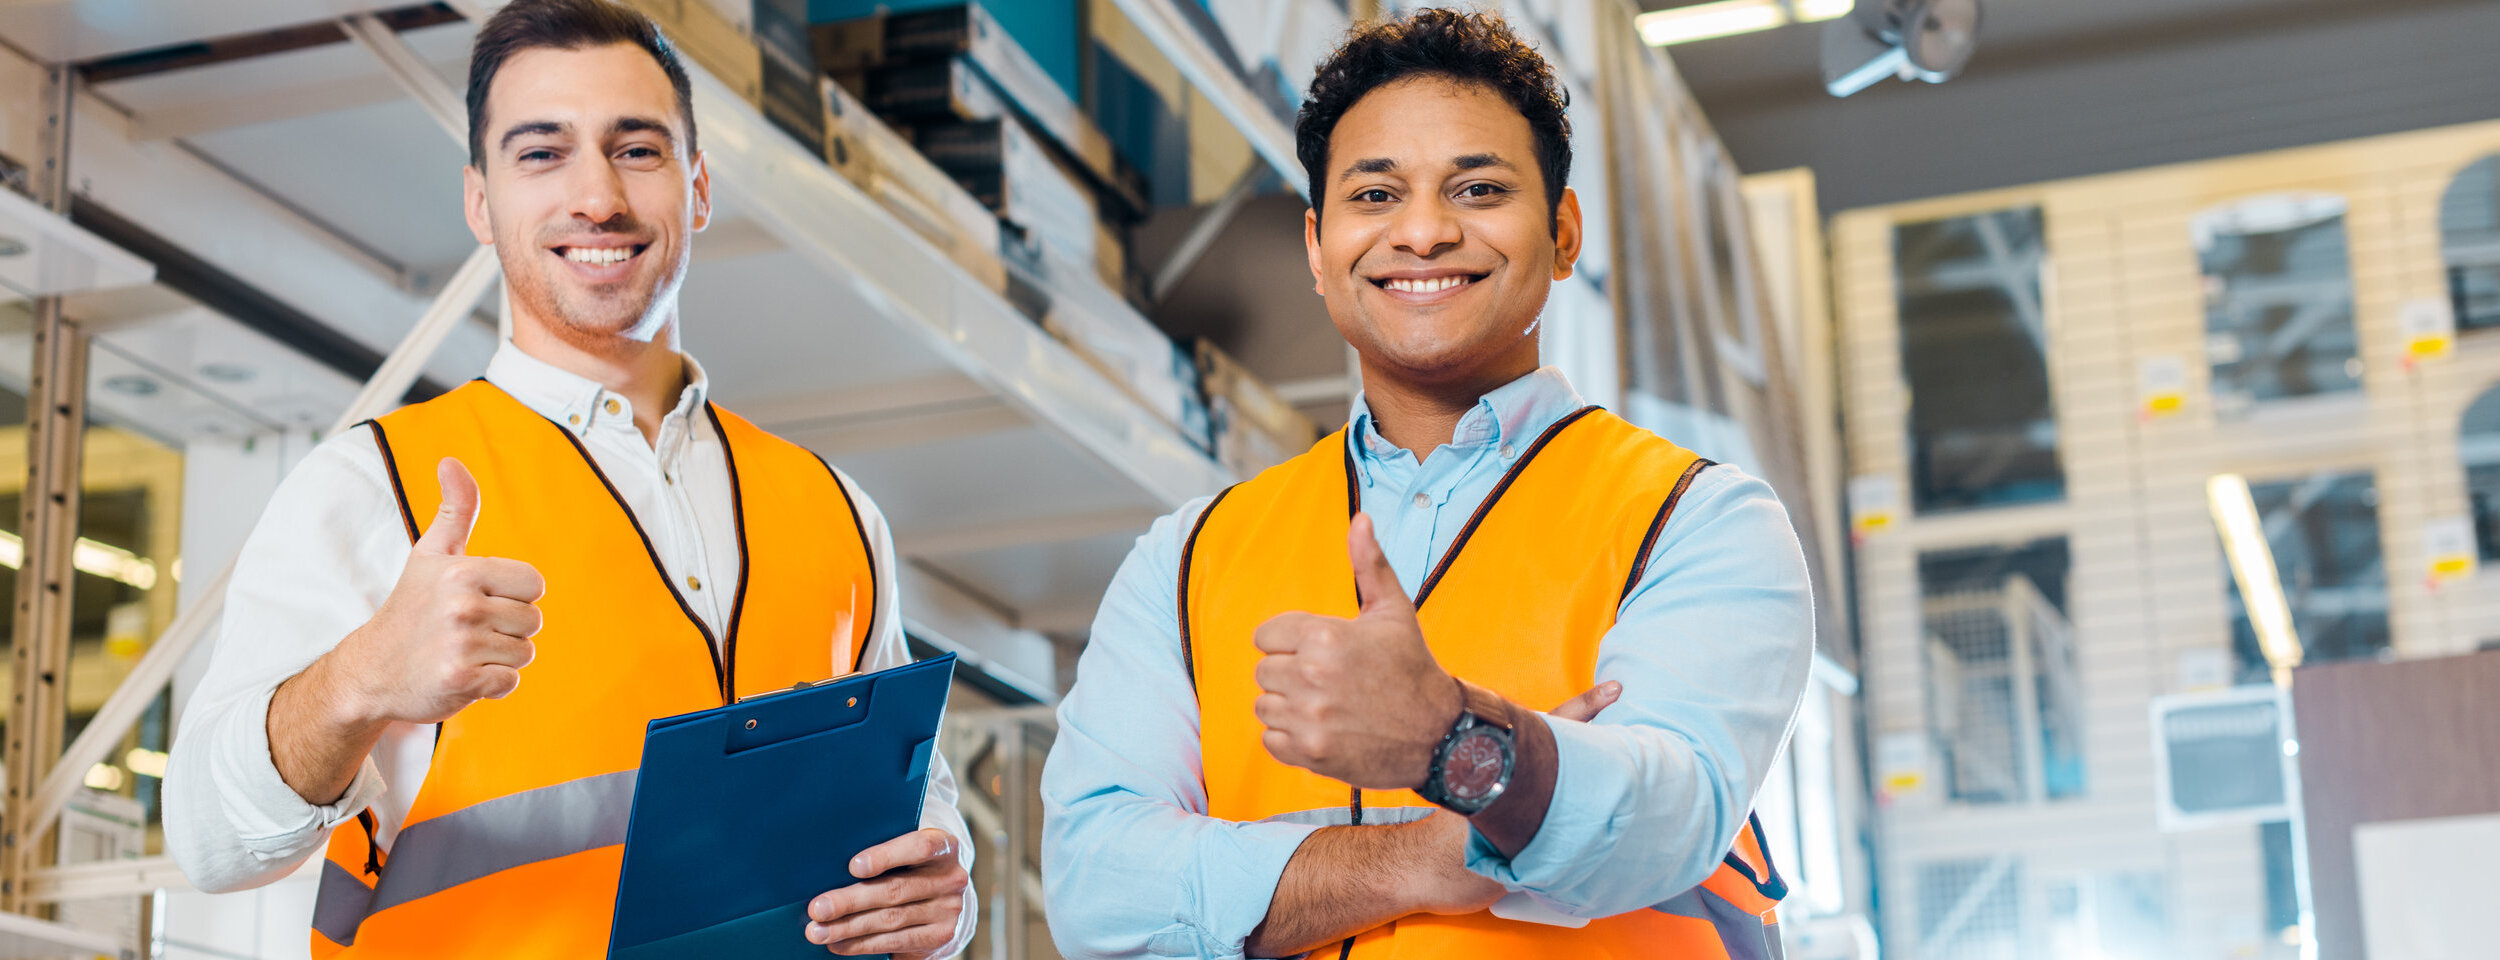 cheerful multicultural warehouse workers showing thumbs up and looking at camera